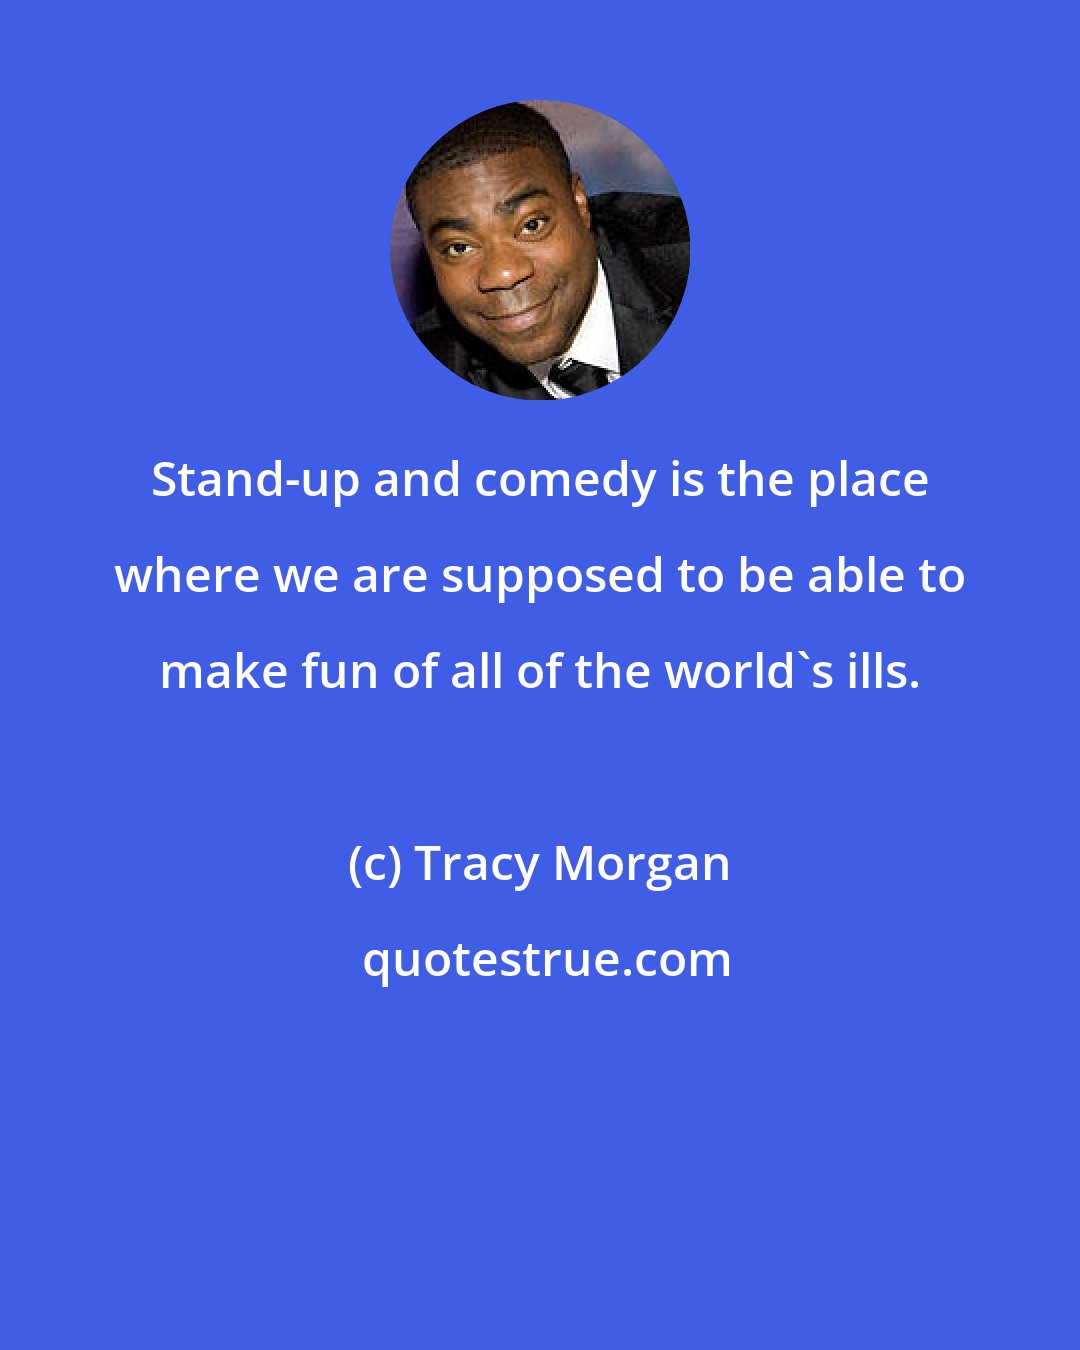 Tracy Morgan: Stand-up and comedy is the place where we are supposed to be able to make fun of all of the world's ills.